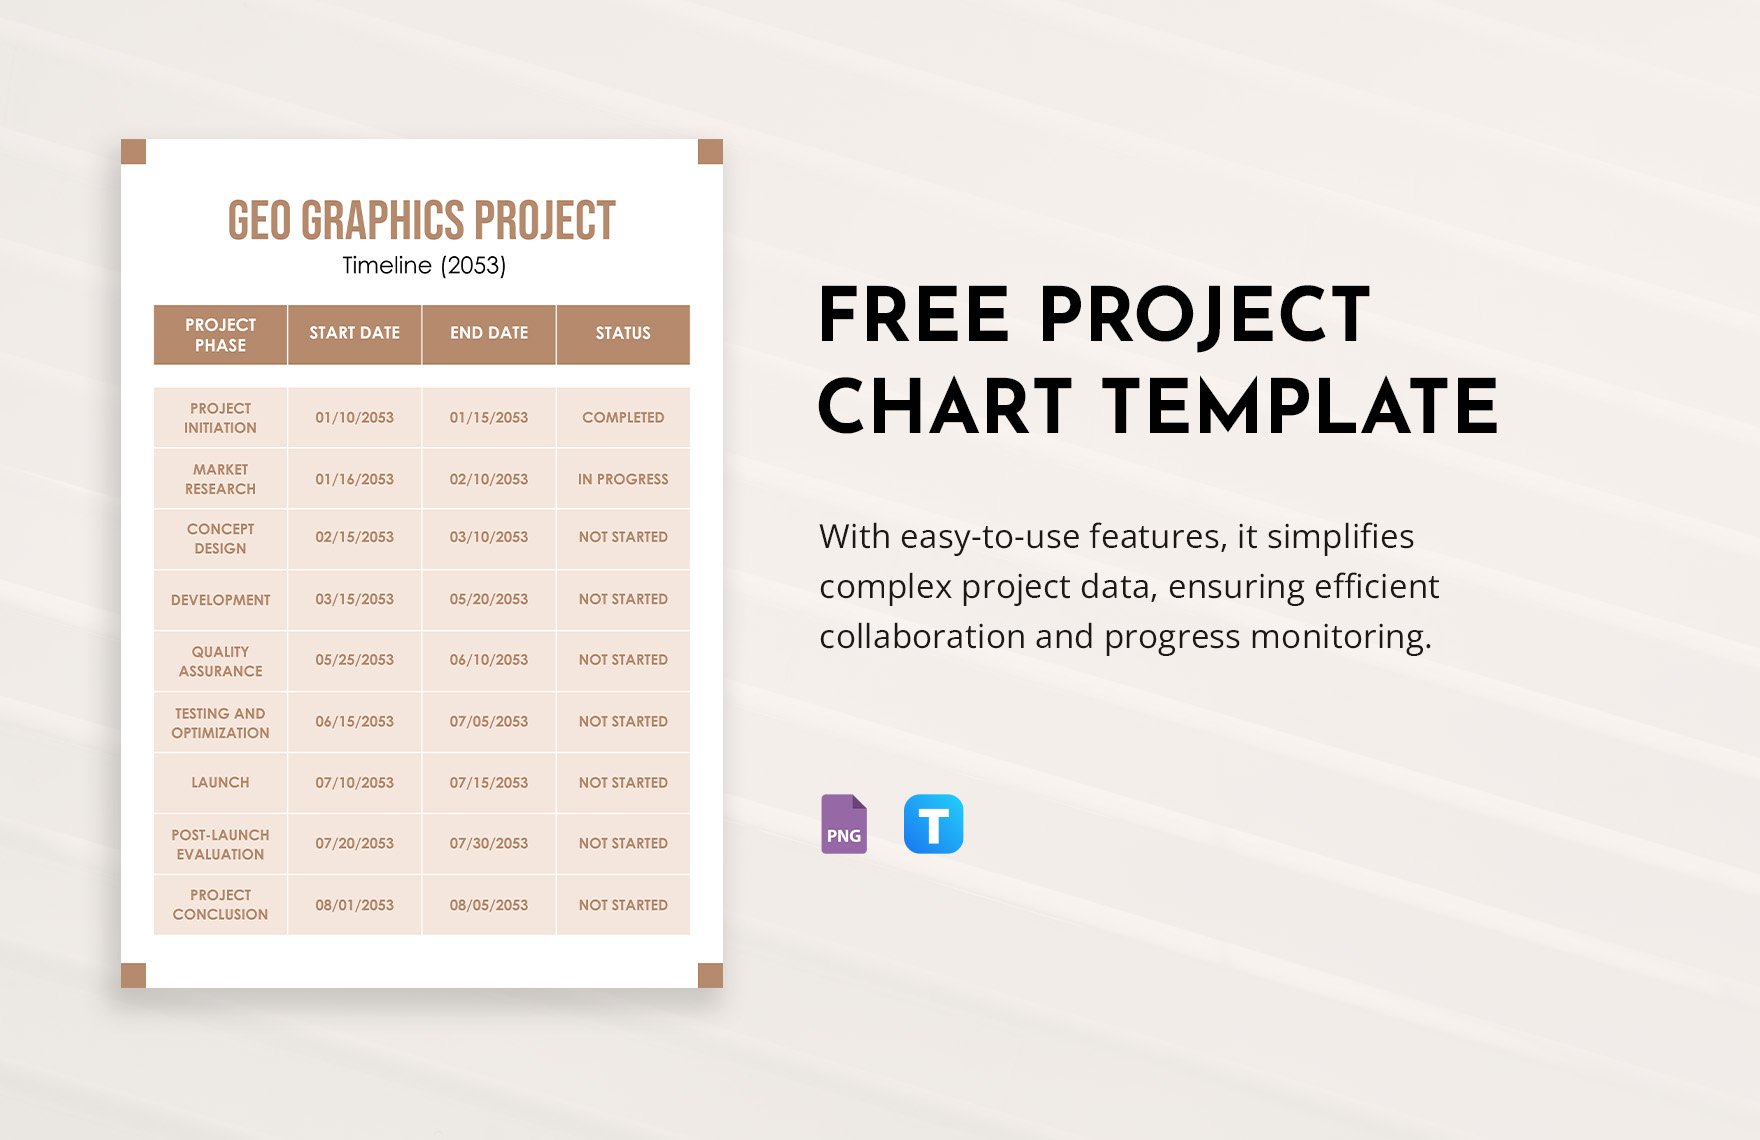 Free Project Chart Template